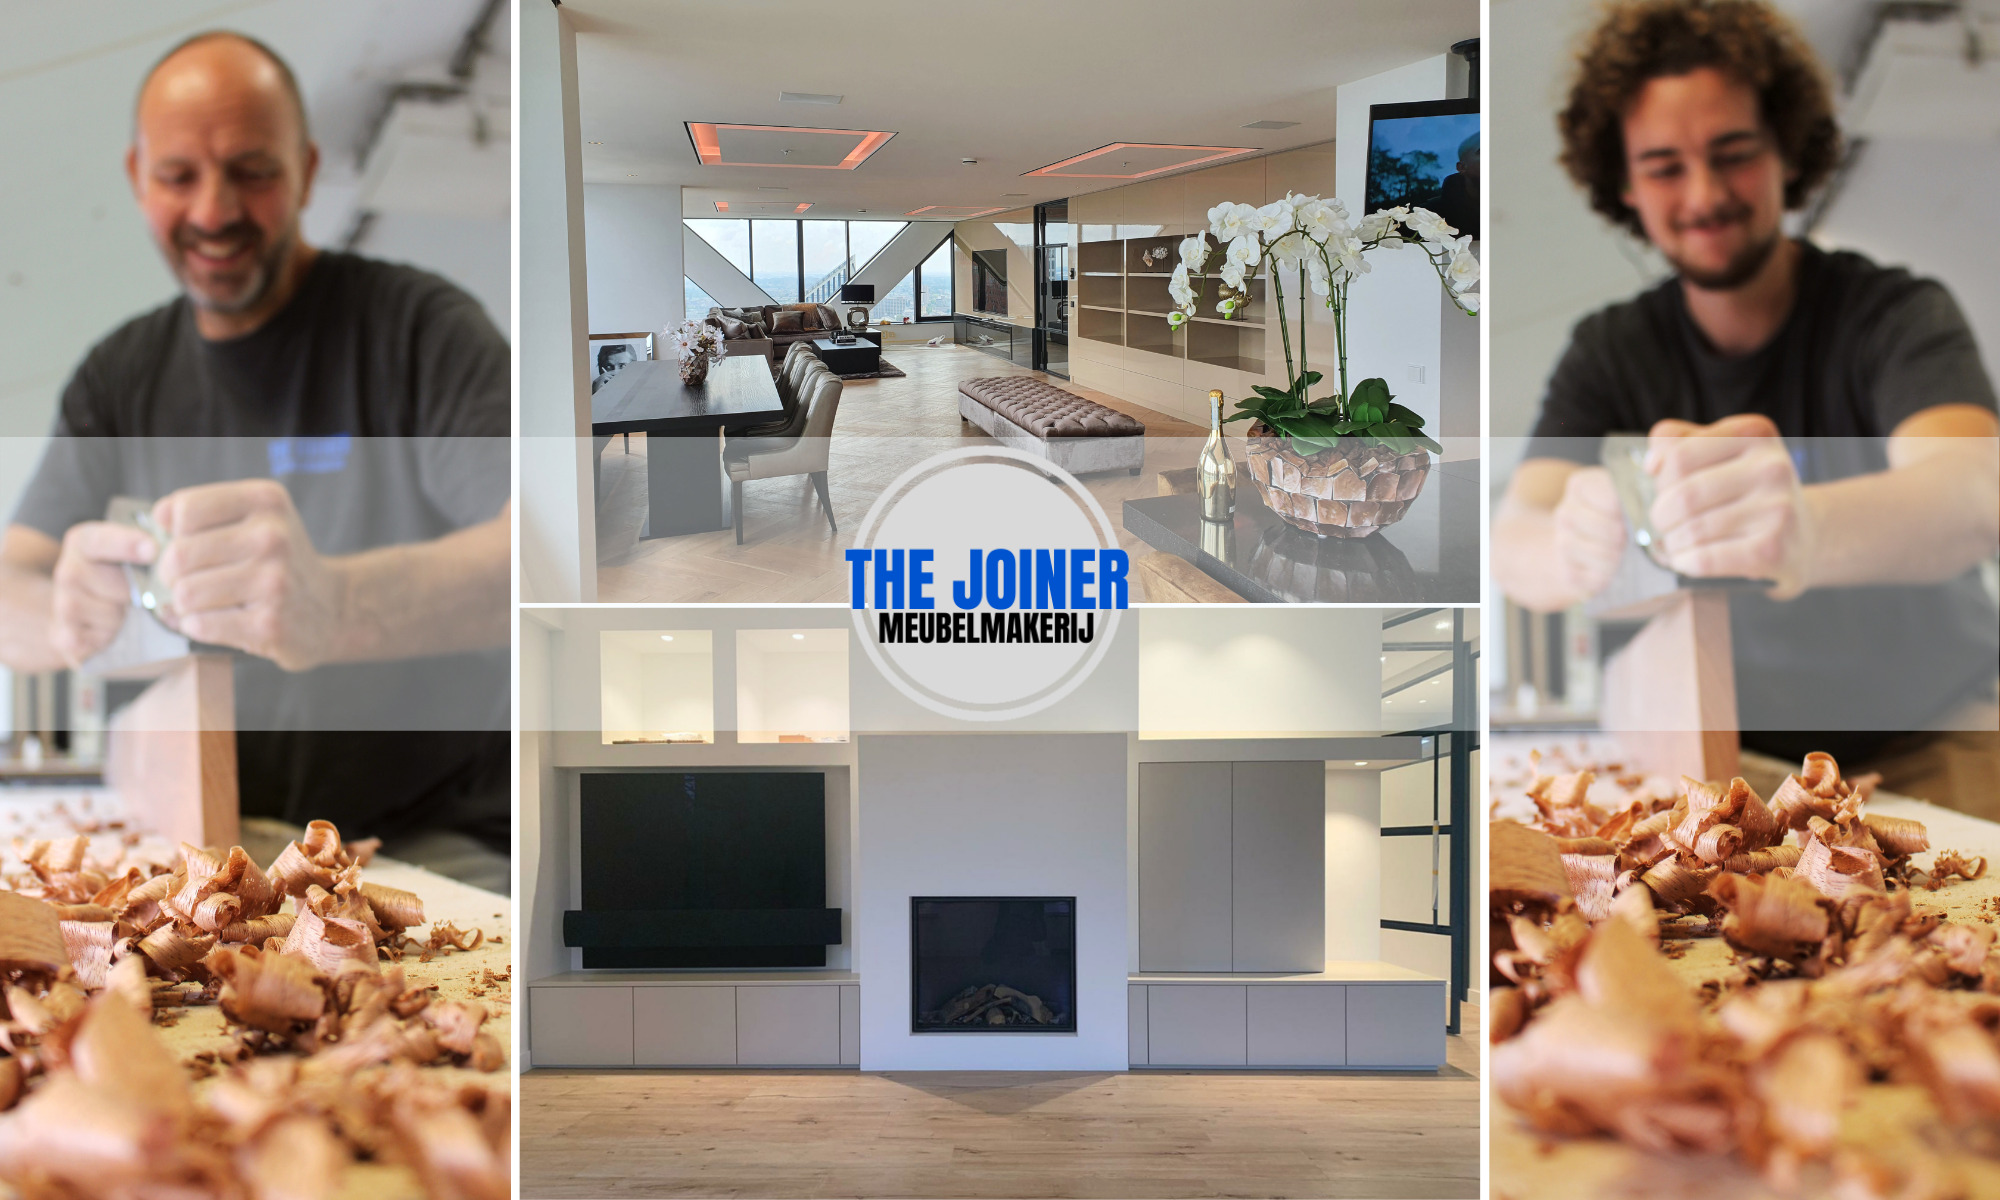 The Joiner